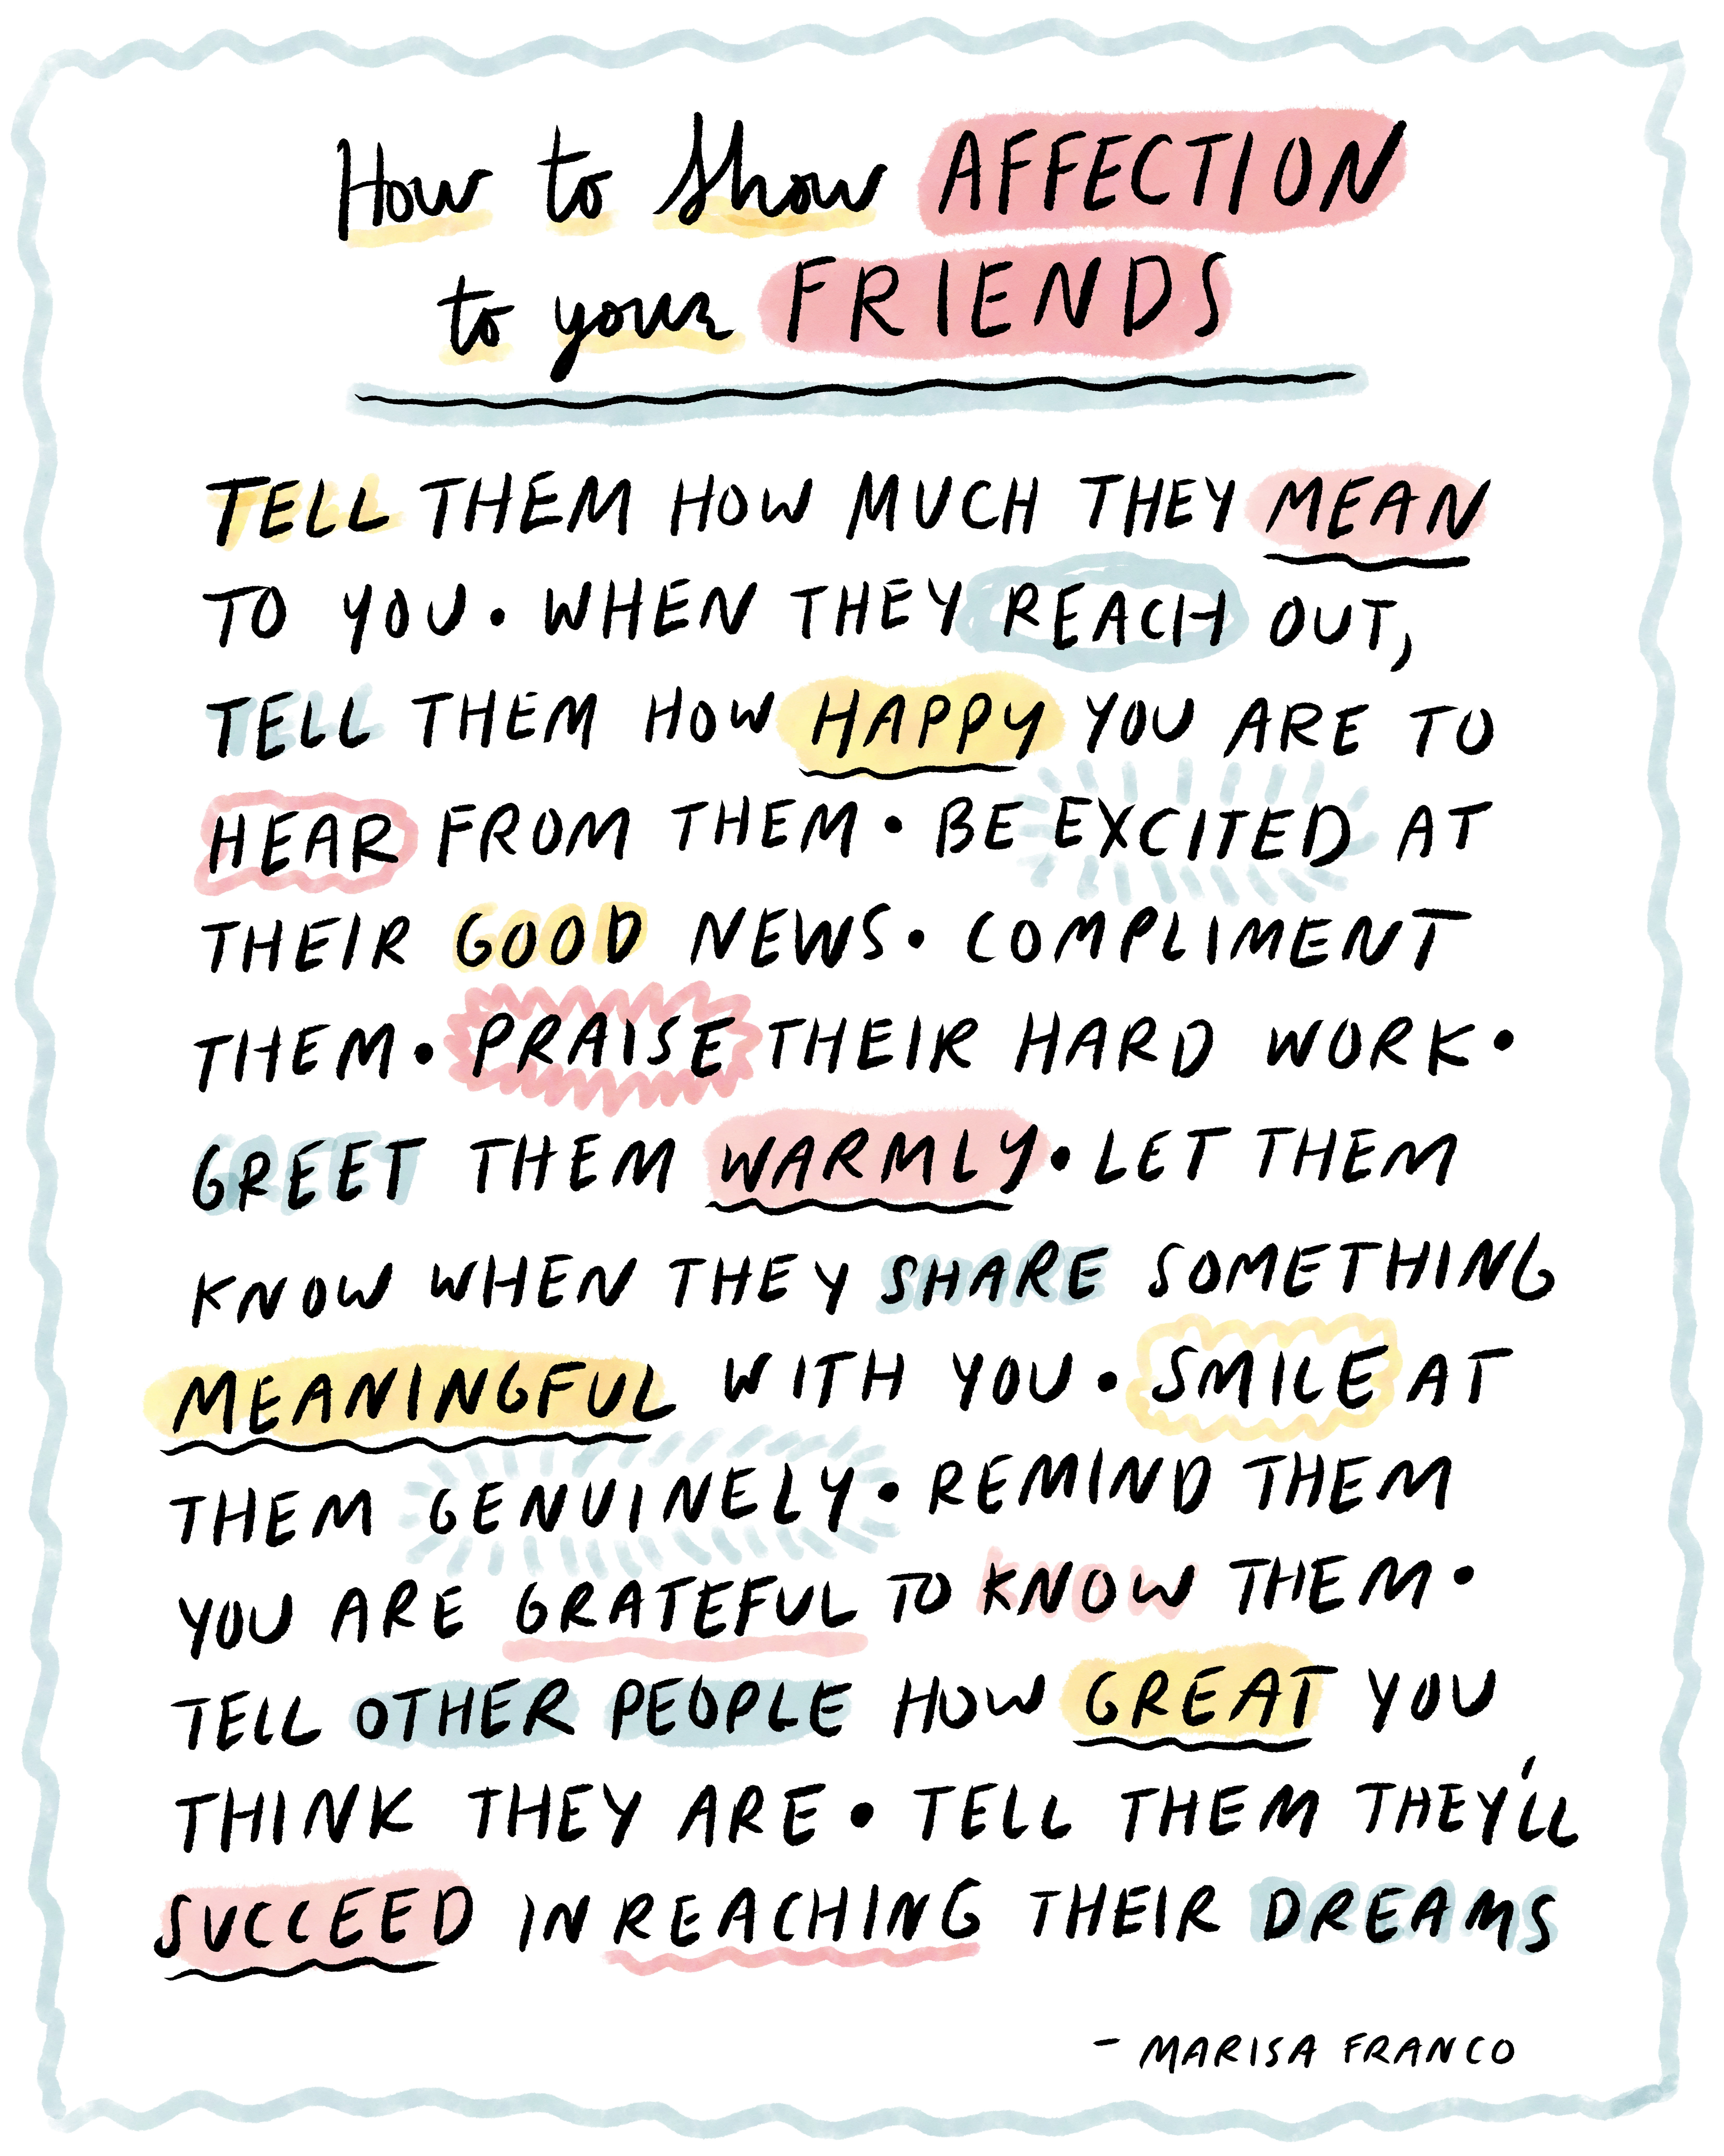 How Do You Nurture Your Friendship With Others